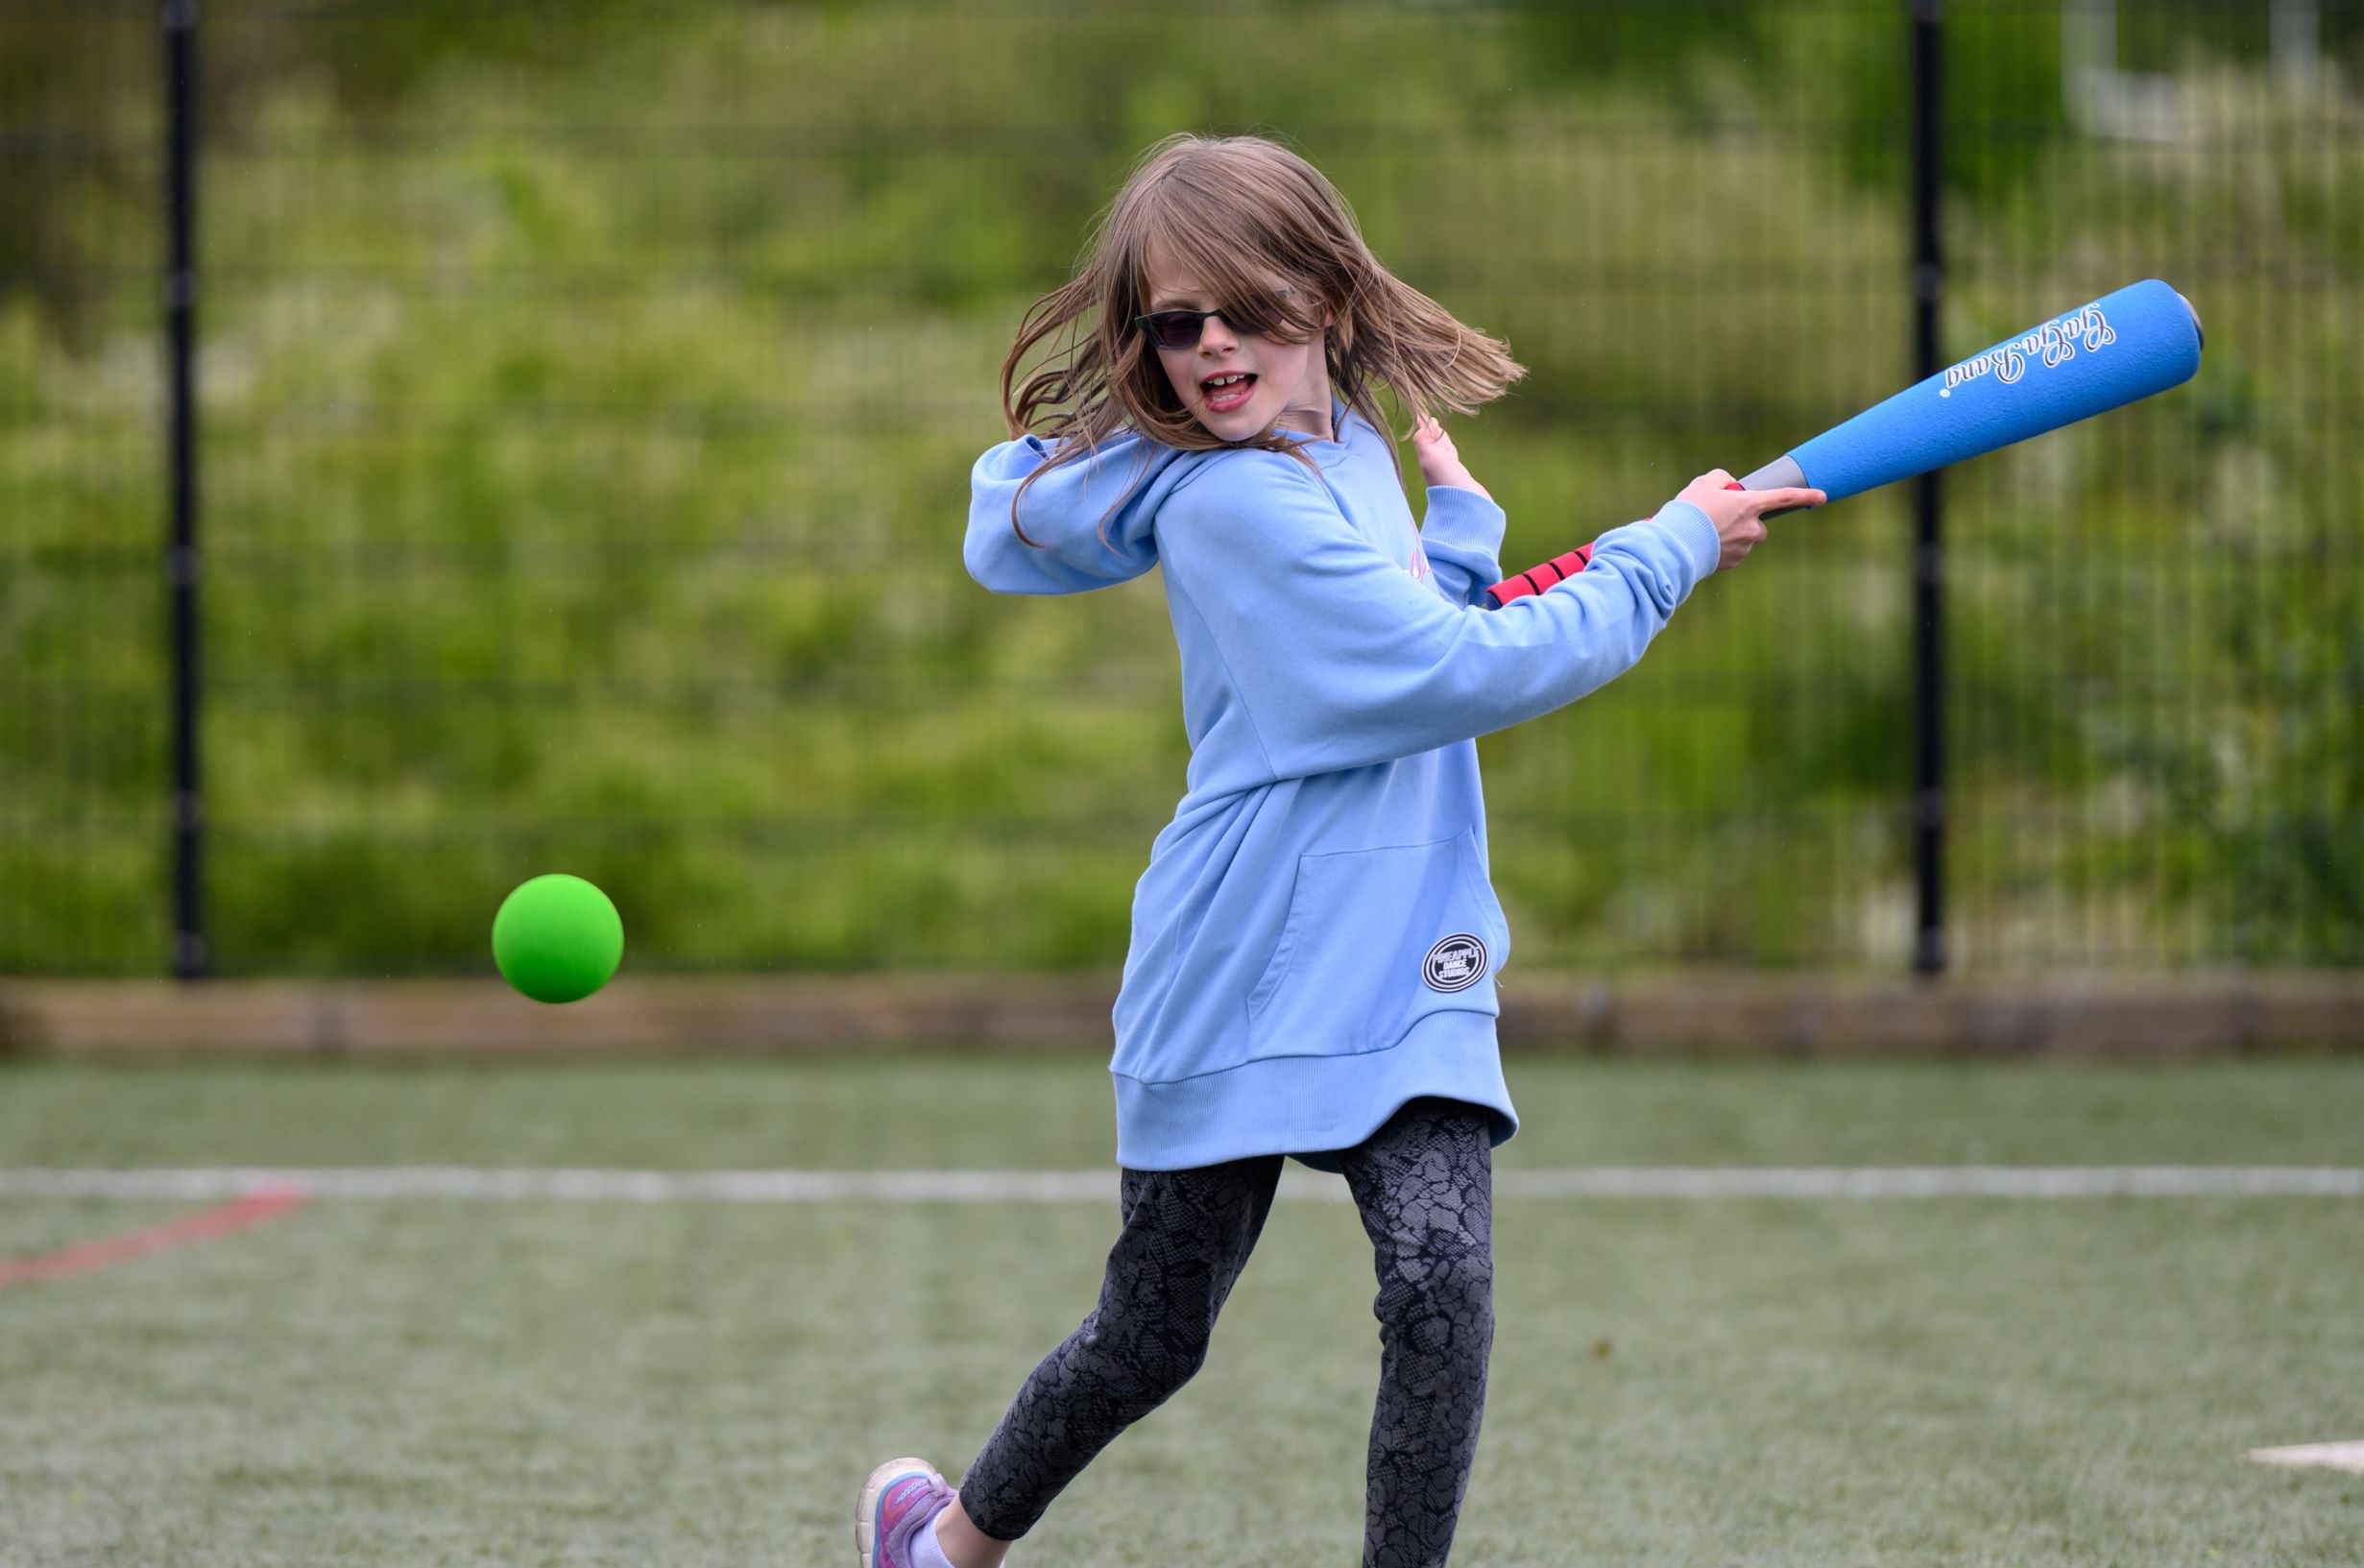 Girl playing rounders at multi sport facility